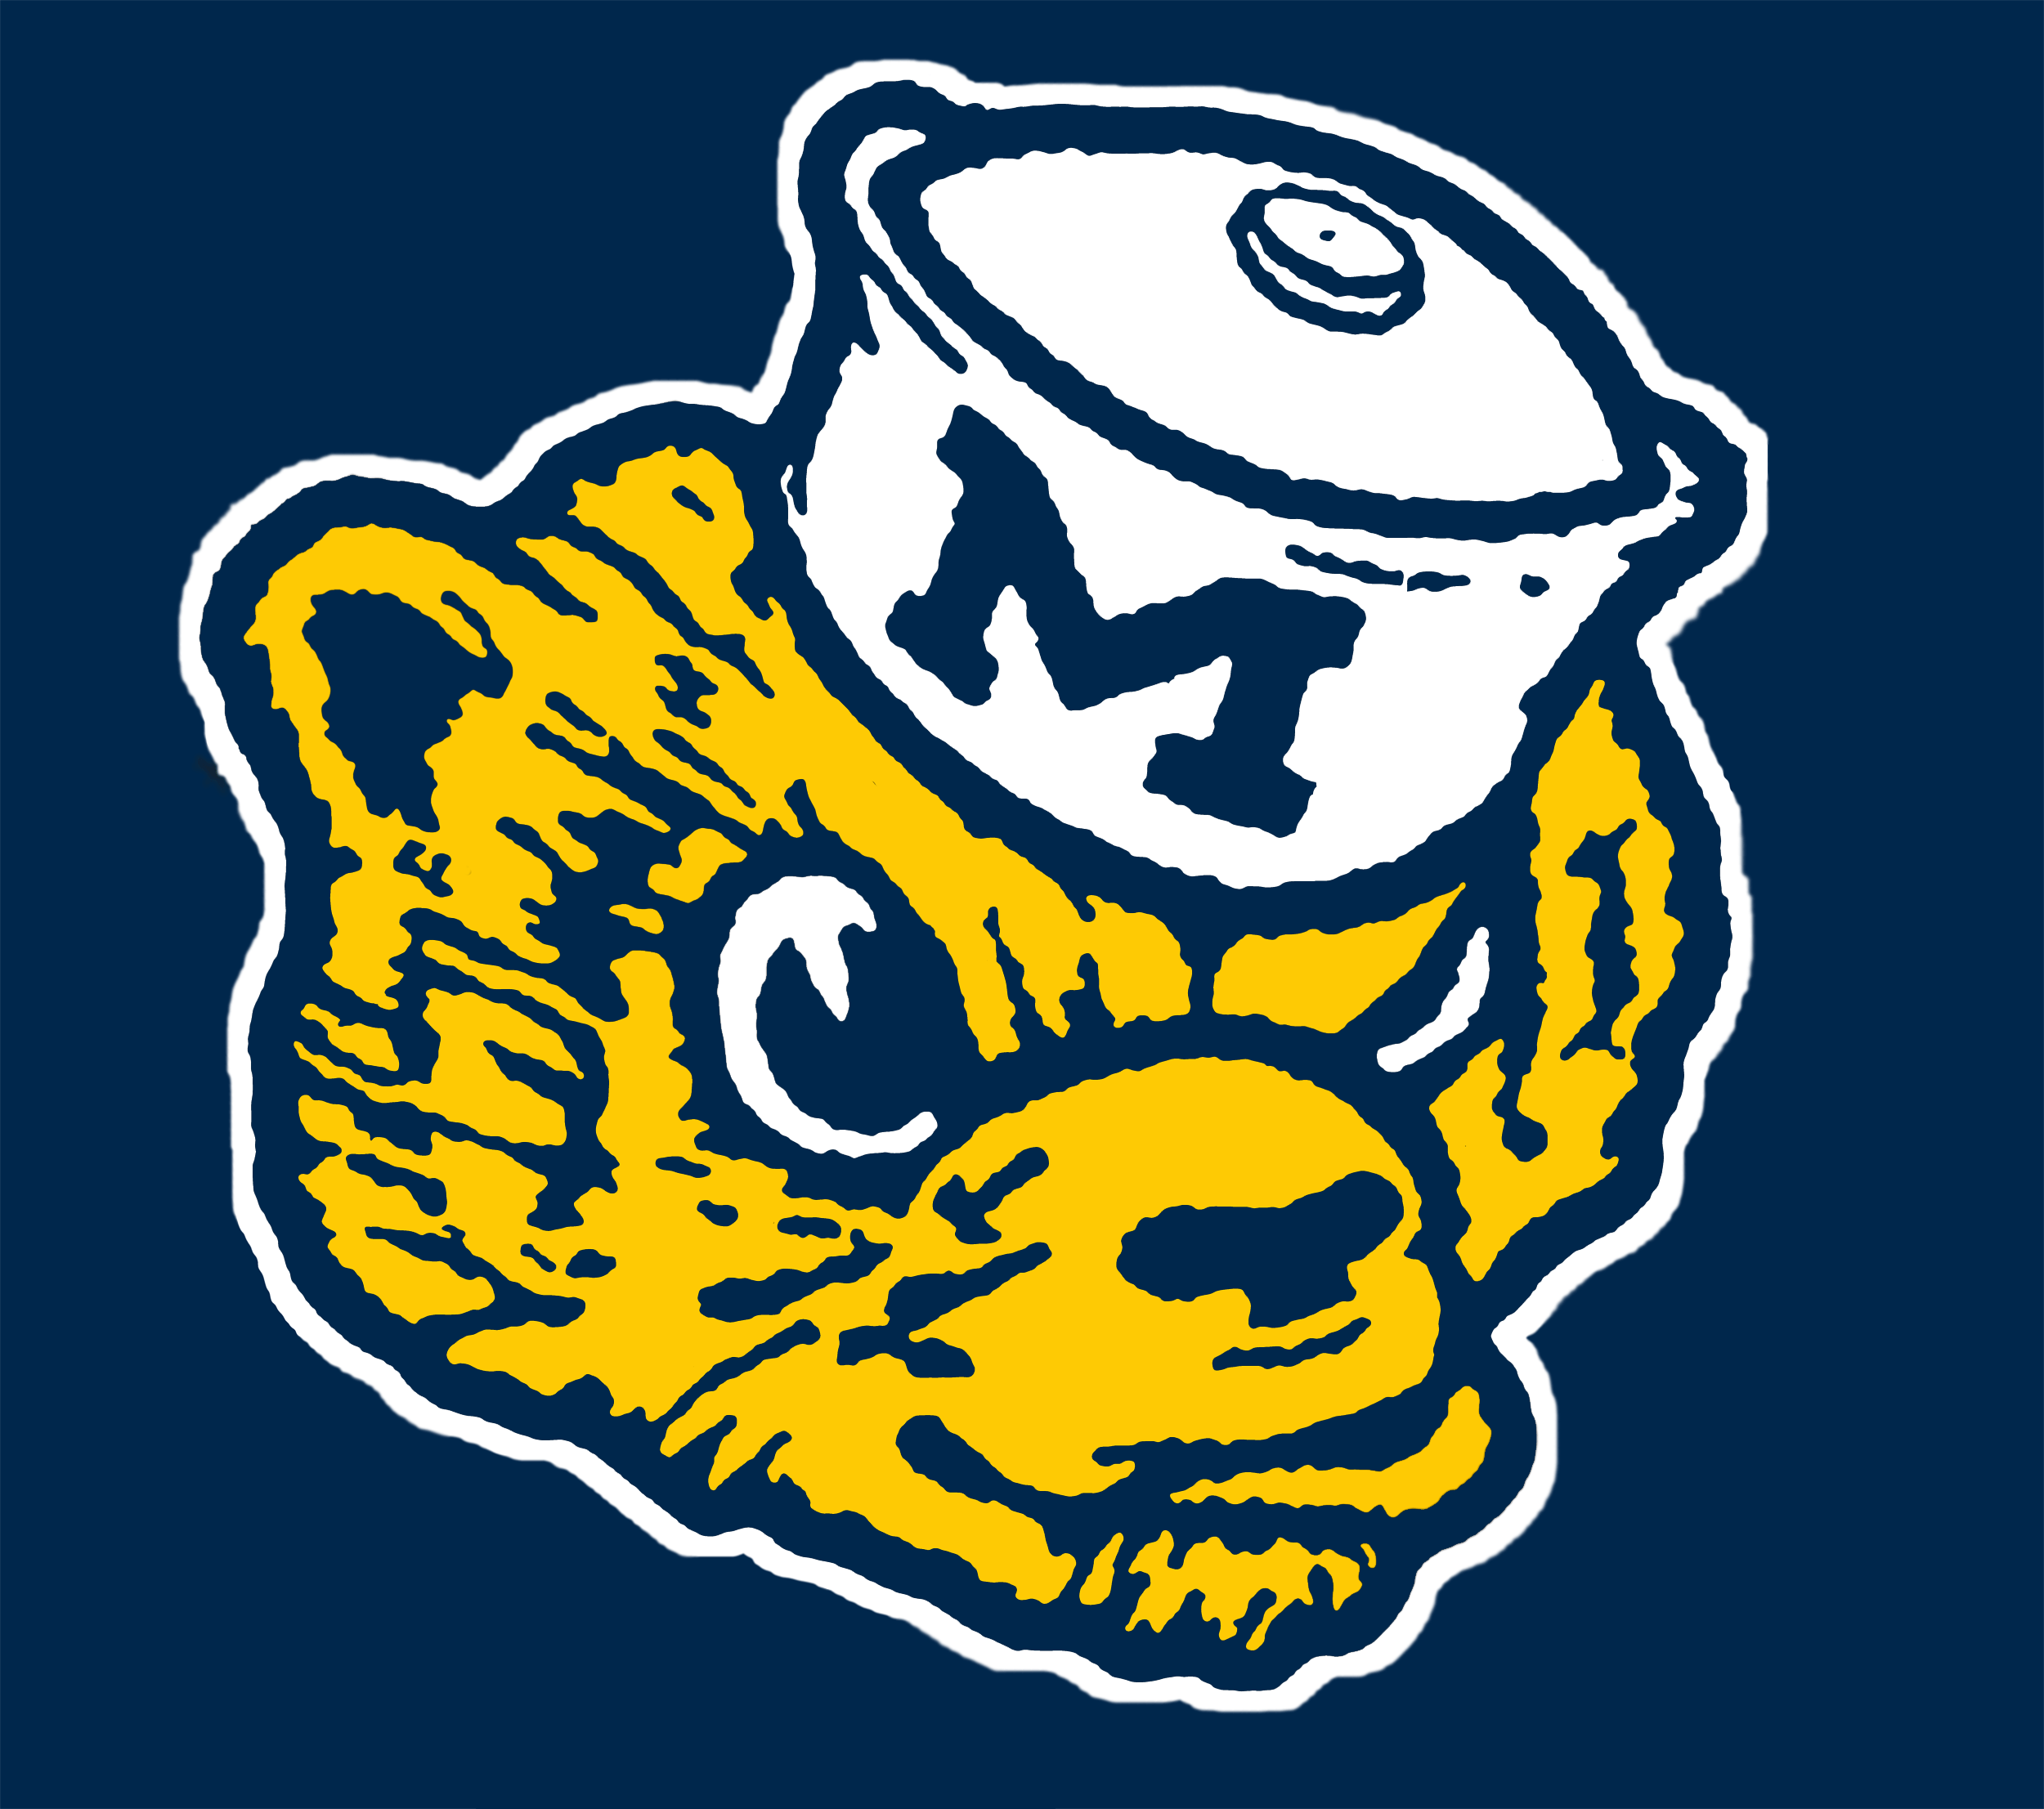 Michigan Football Logo - So, after looking at vintage logos... how did the College Football ...